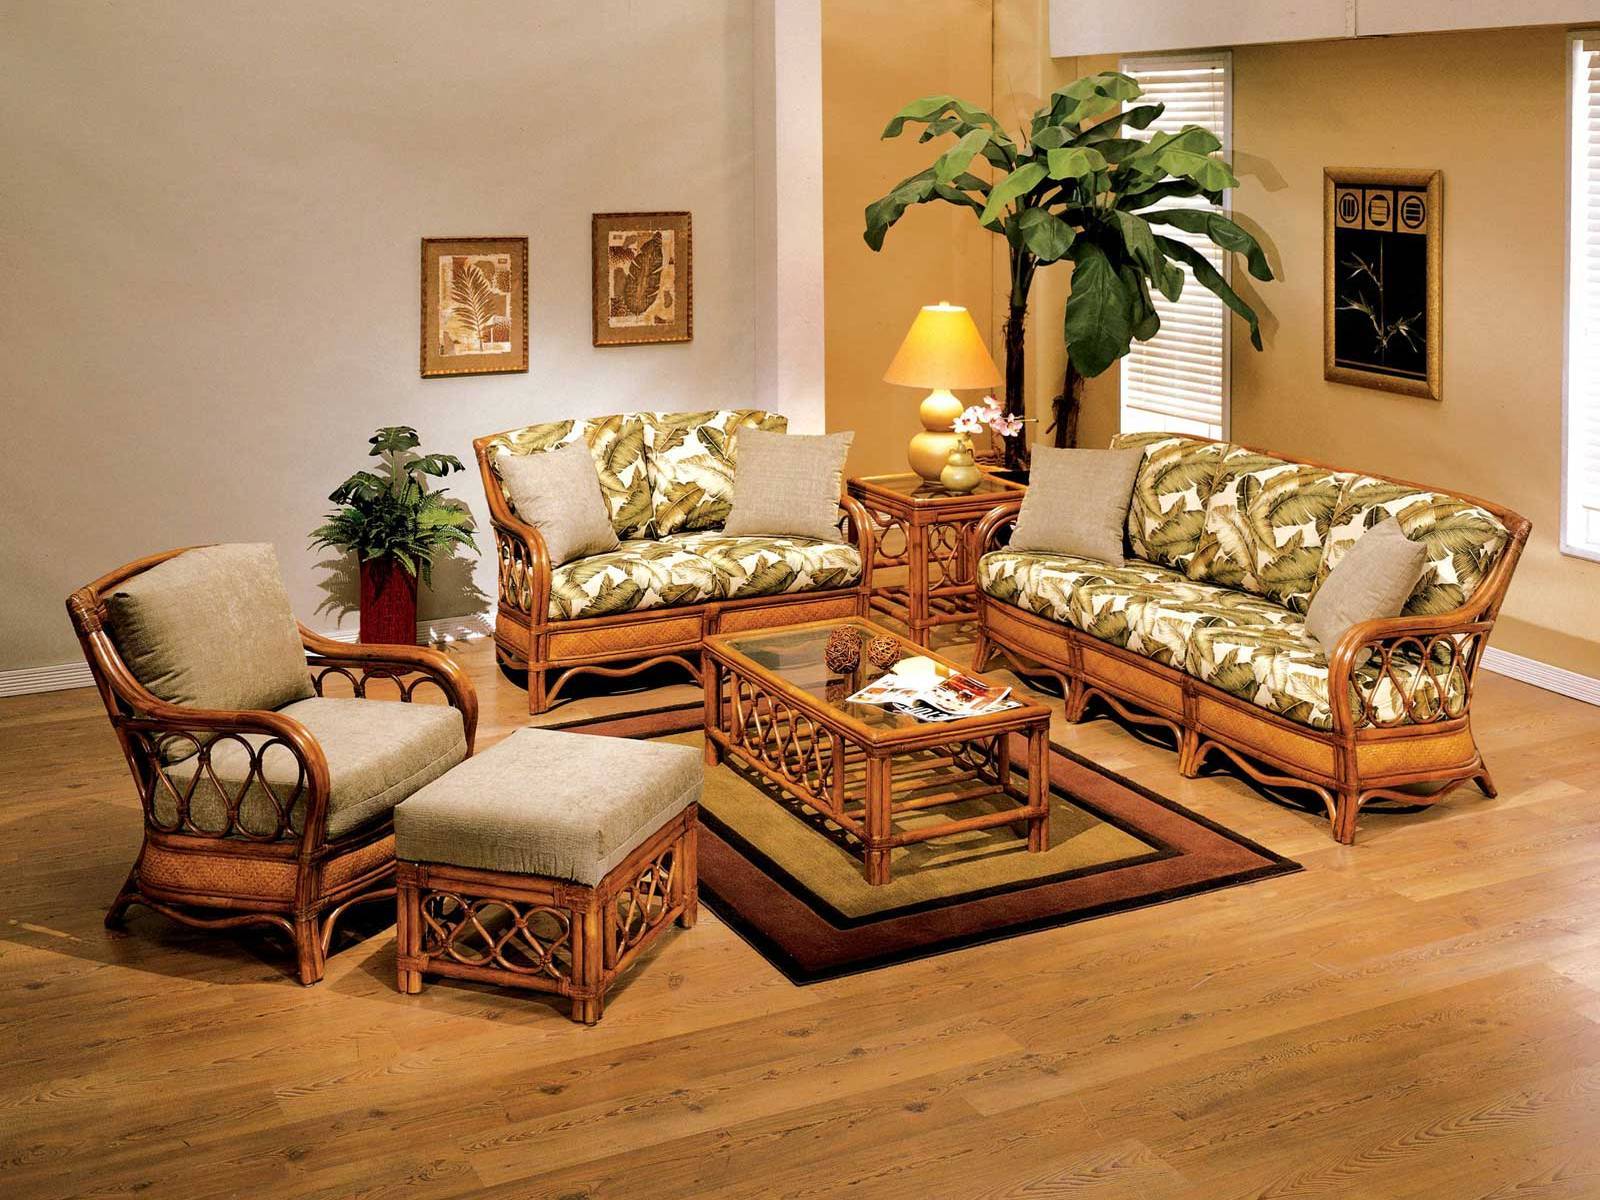 living room ideas with wooden furniture